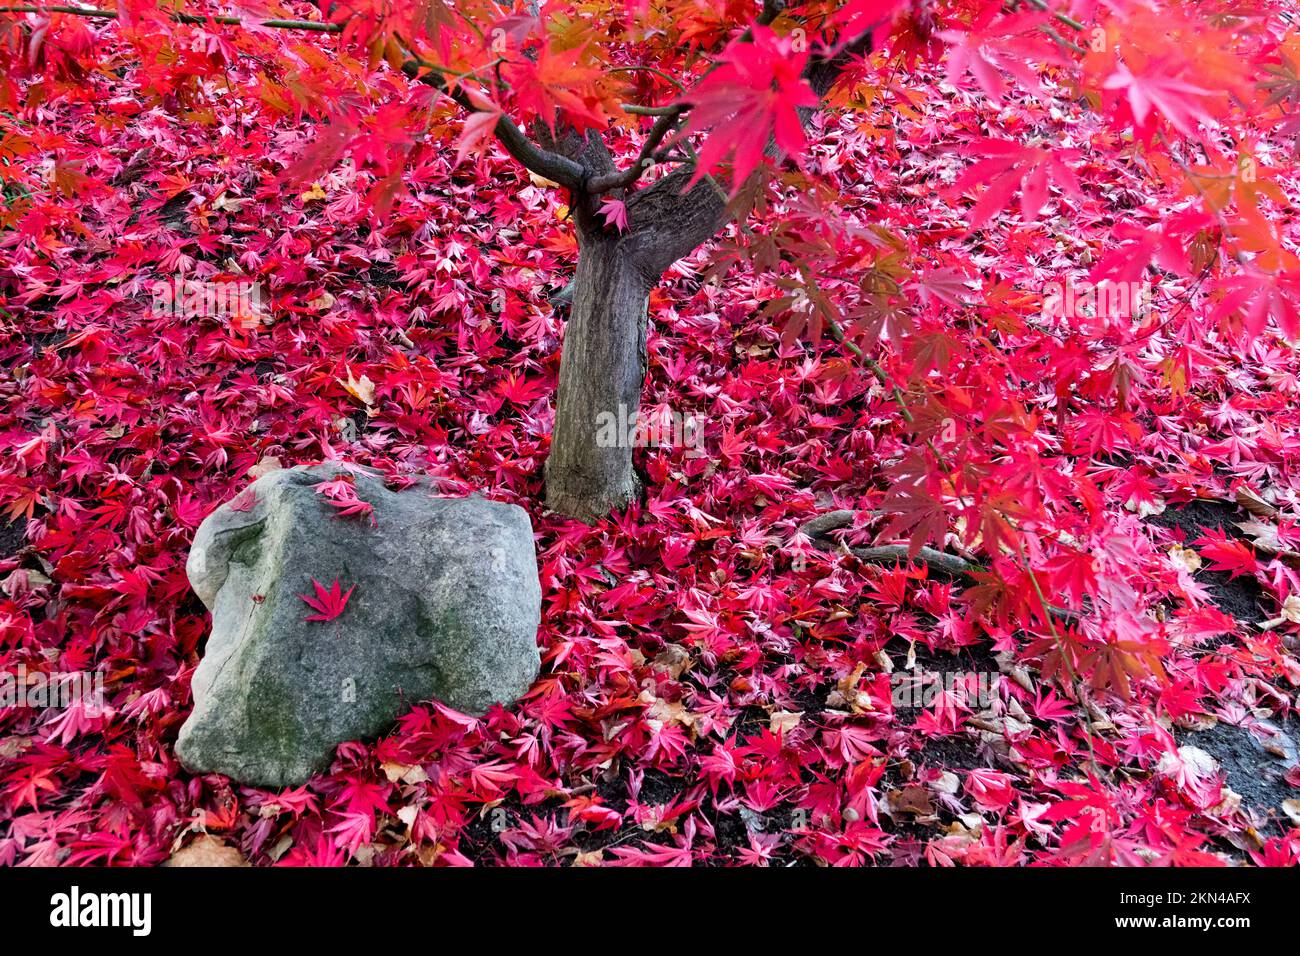 Autumn Acer palmatum Leaves Falling on the ground in the garden Red leaves stone Stock Photo